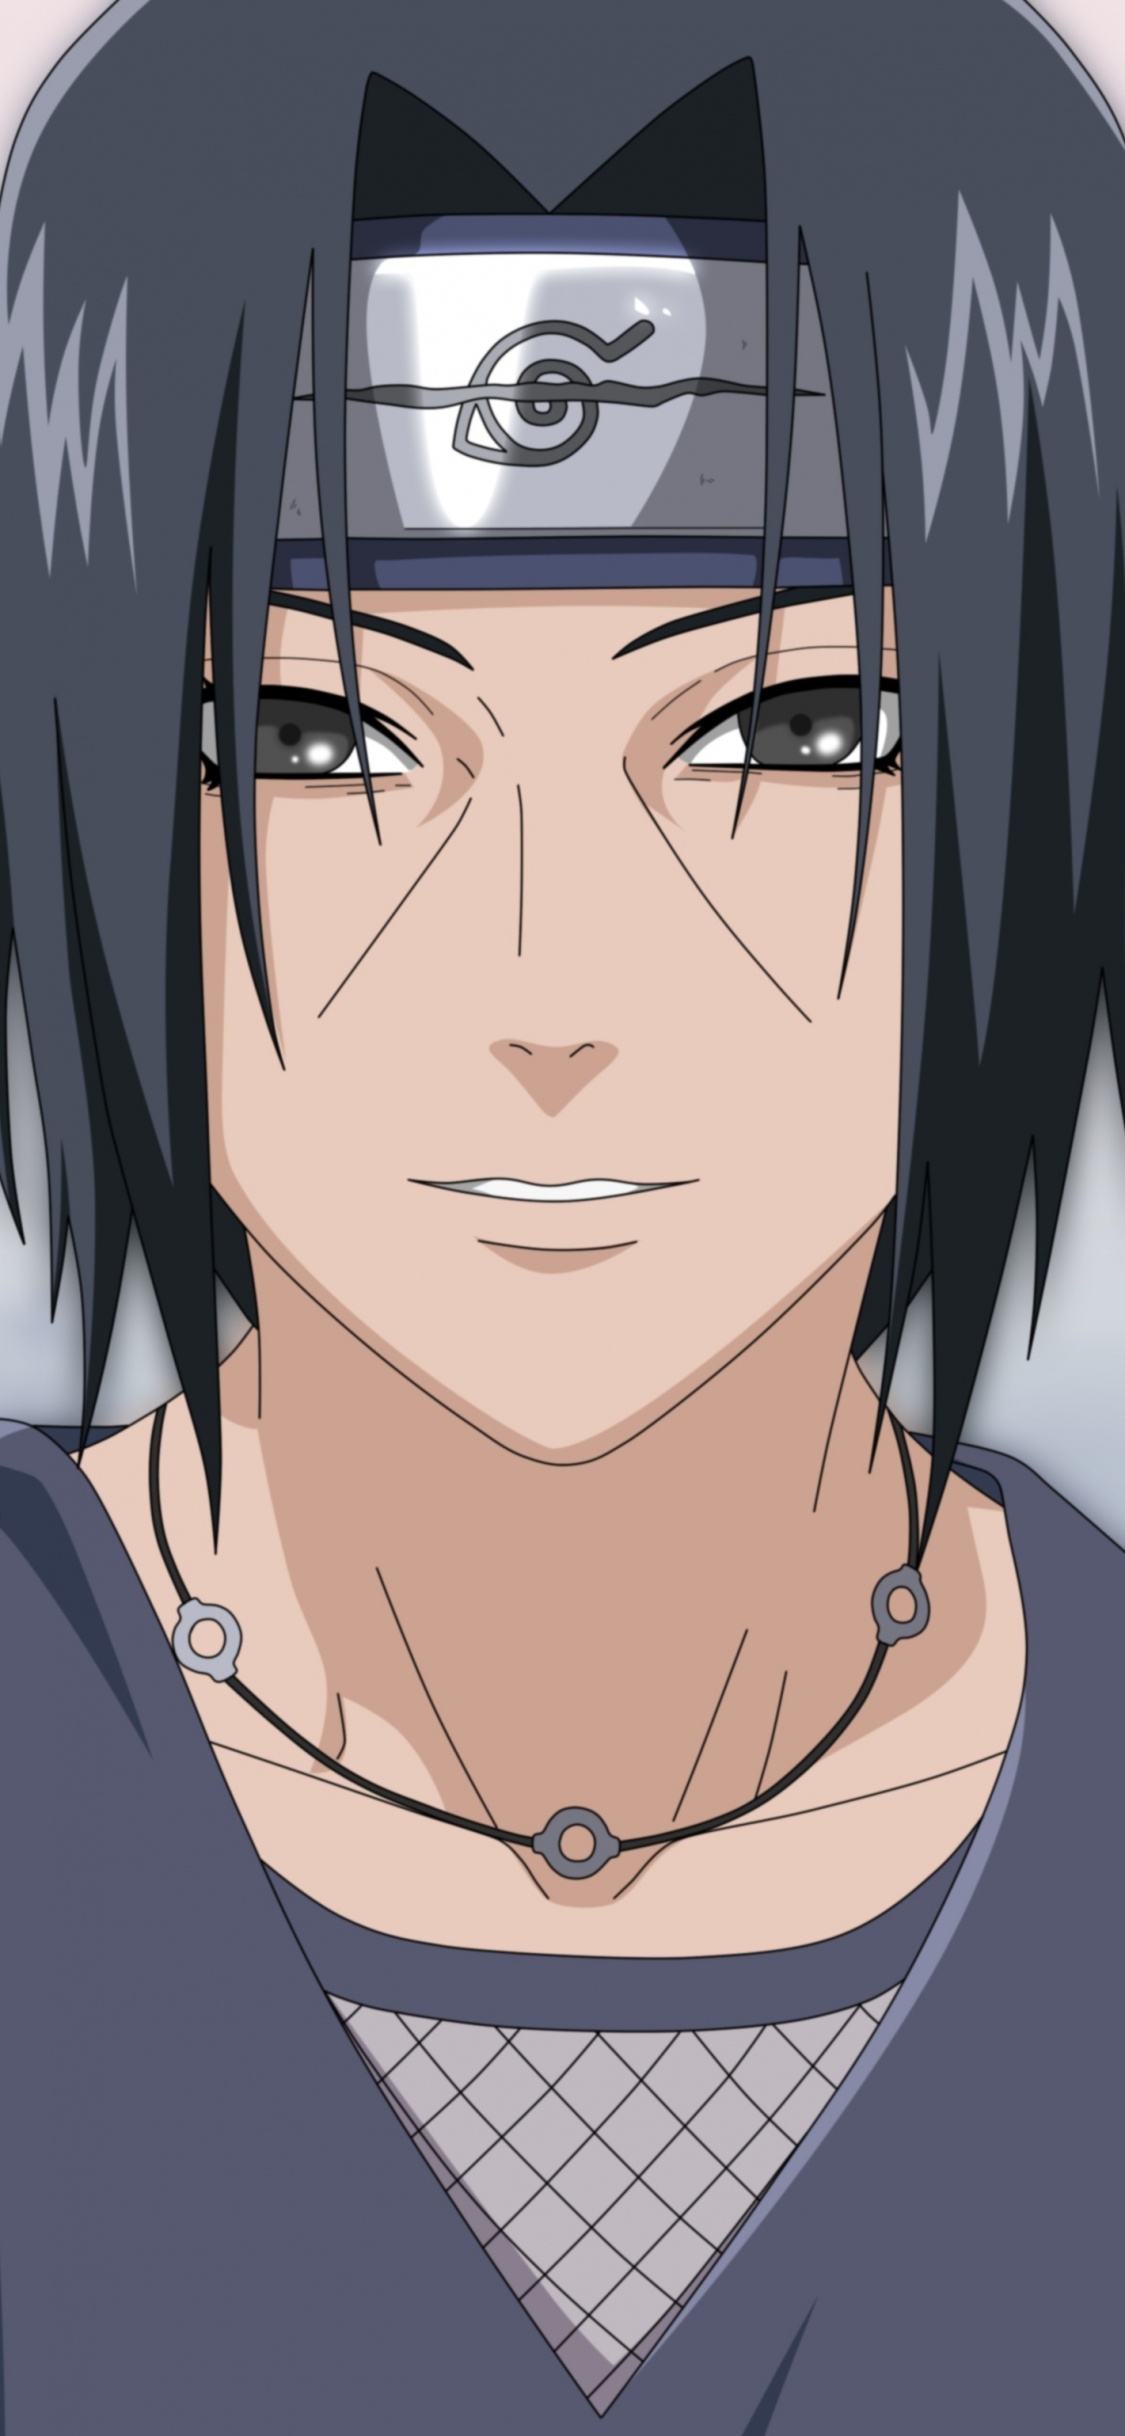 Black Haired Male Anime Character. Wallpaper in 1125x2436 Resolution